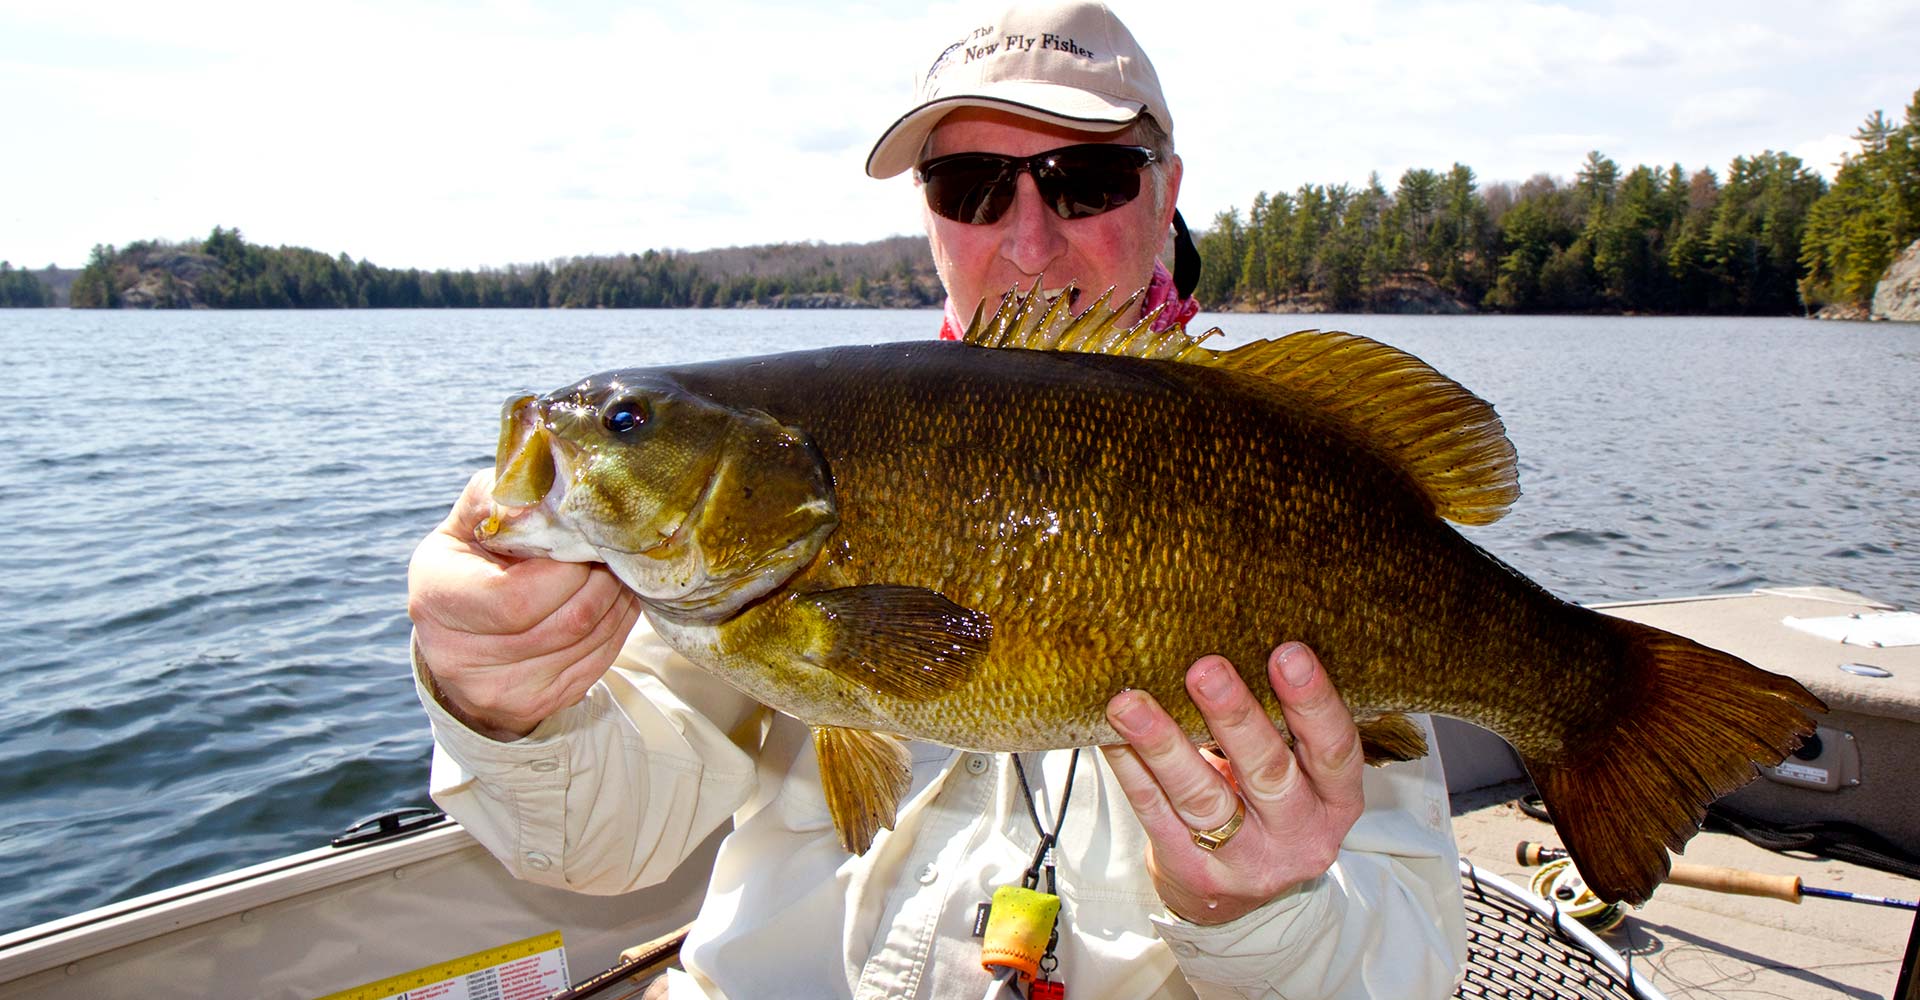 Fly Fishing for Smallmouth Bass Digital Download